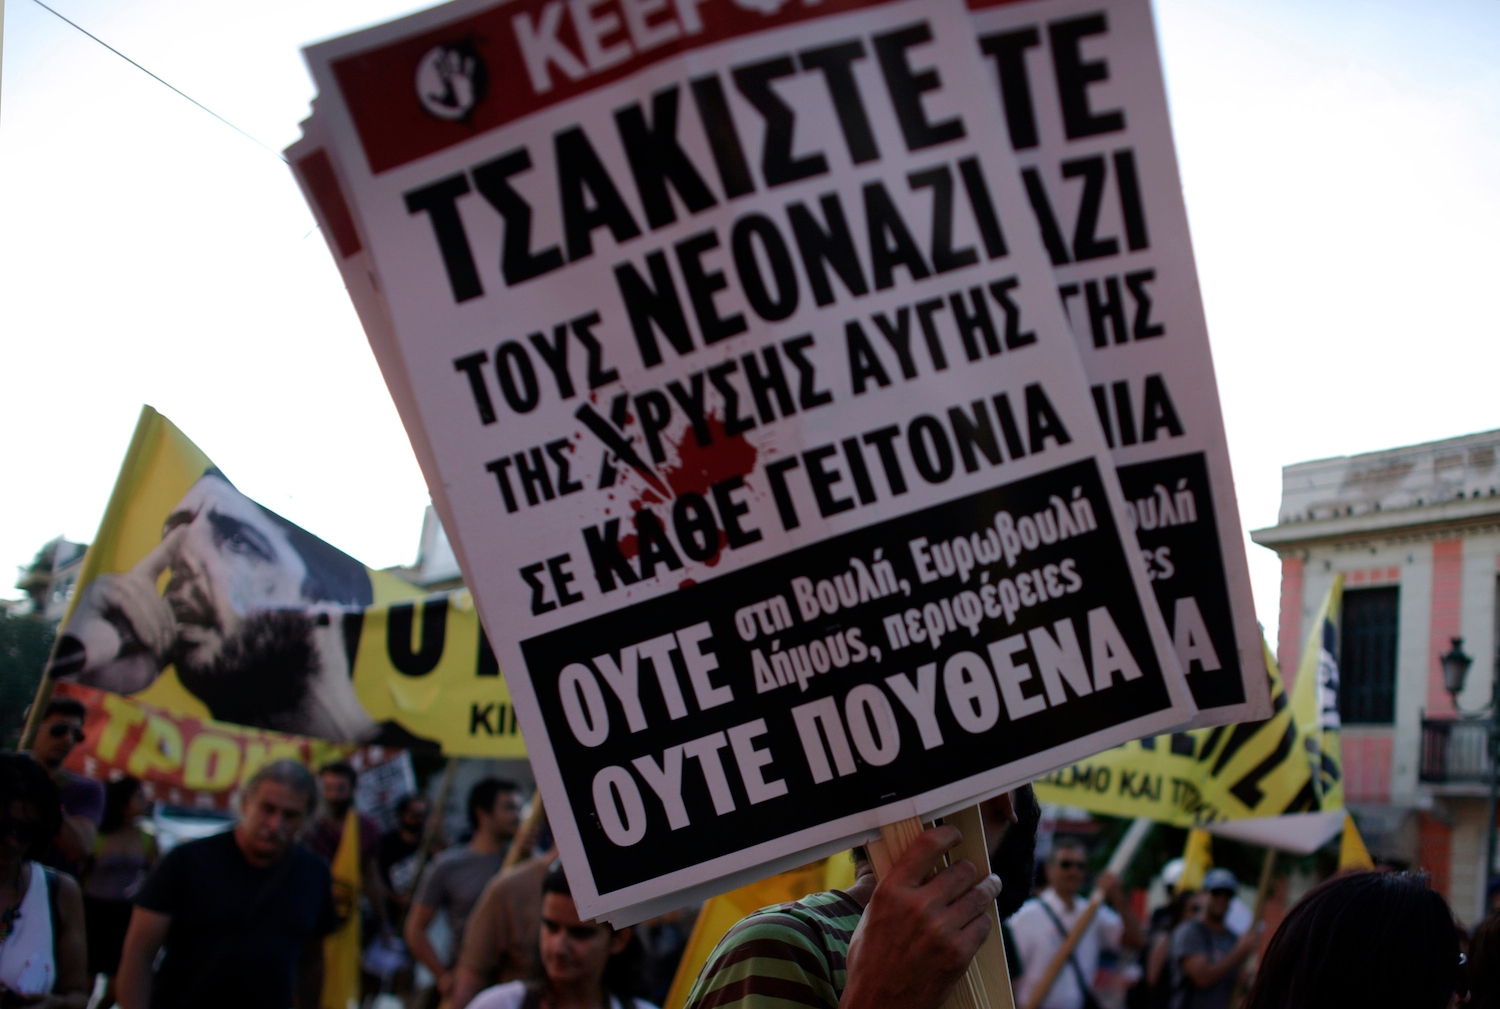 Anti-fascist protesters hold a banner in front of Athens municipal amphitheater during a swearing-in ceremony, Aug. 29, 2014. Jailed spokesman of Greece’s extreme right Golden Party Kasidiaris has been granted a short leave from prison to take part is swearing ceremony on Athens’ new city council, after the party won 16 percent of the capital’s vote in May municipal elections. Neo-Nazi Golden Dawn party has 9 of its 18 lawmakers currently in prison, awaiting trial for alleged criminal activity. (Milos Bicanski/Getty Images)